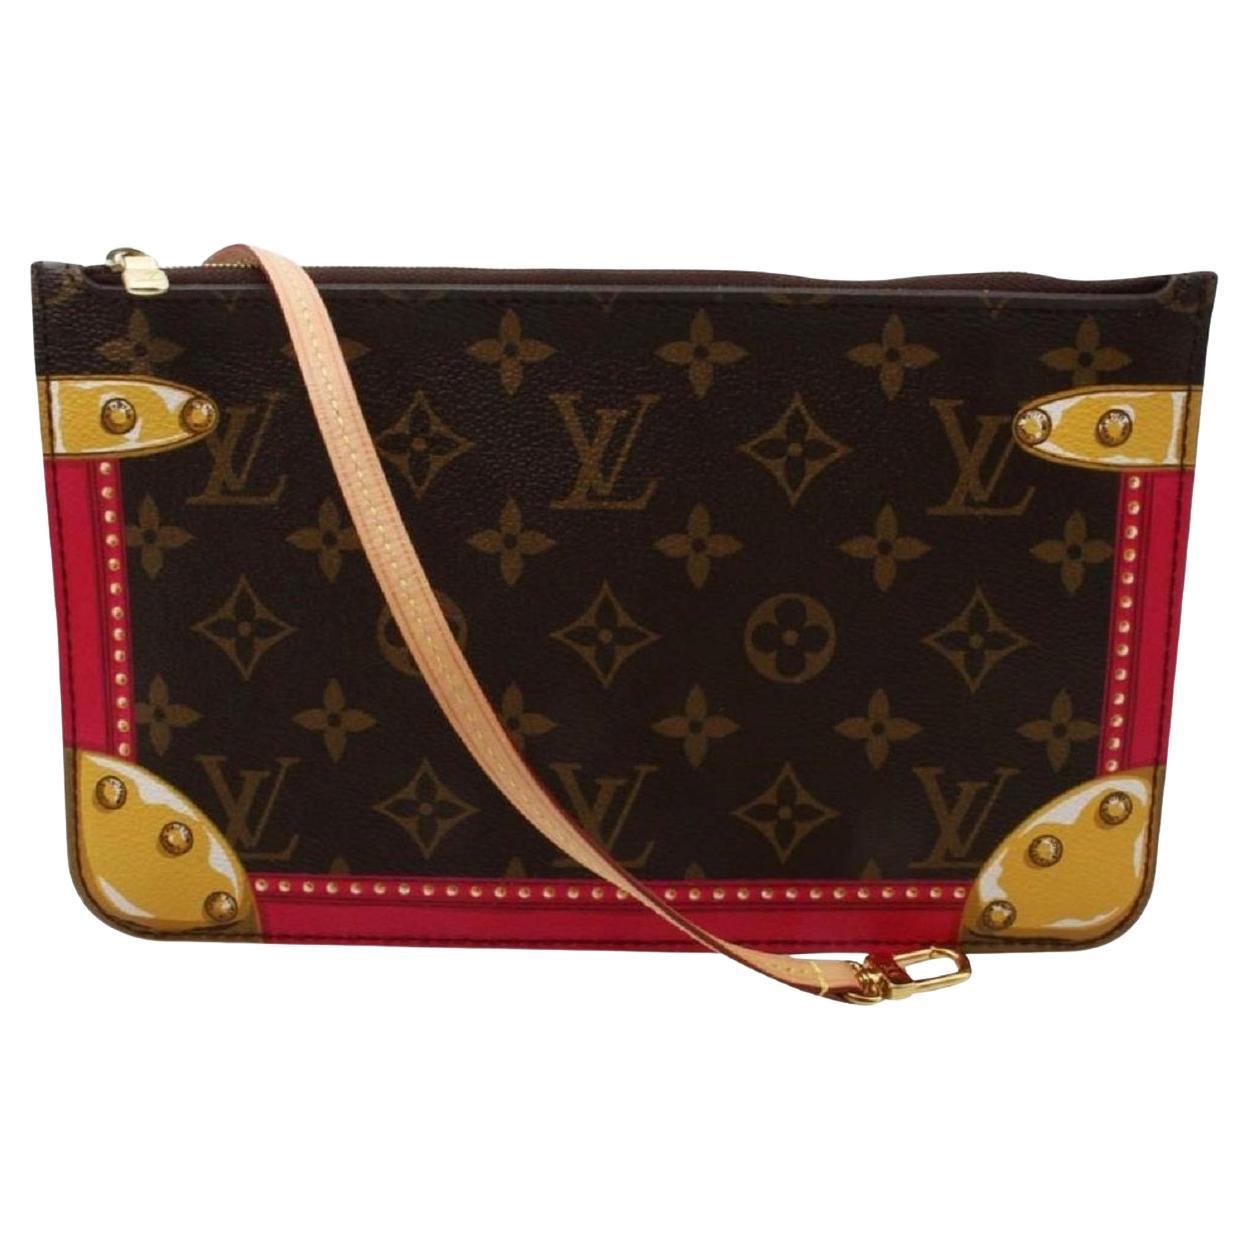 Vintage Louis Vuitton: Bags, Clothing & More - 11,998 For Sale at 